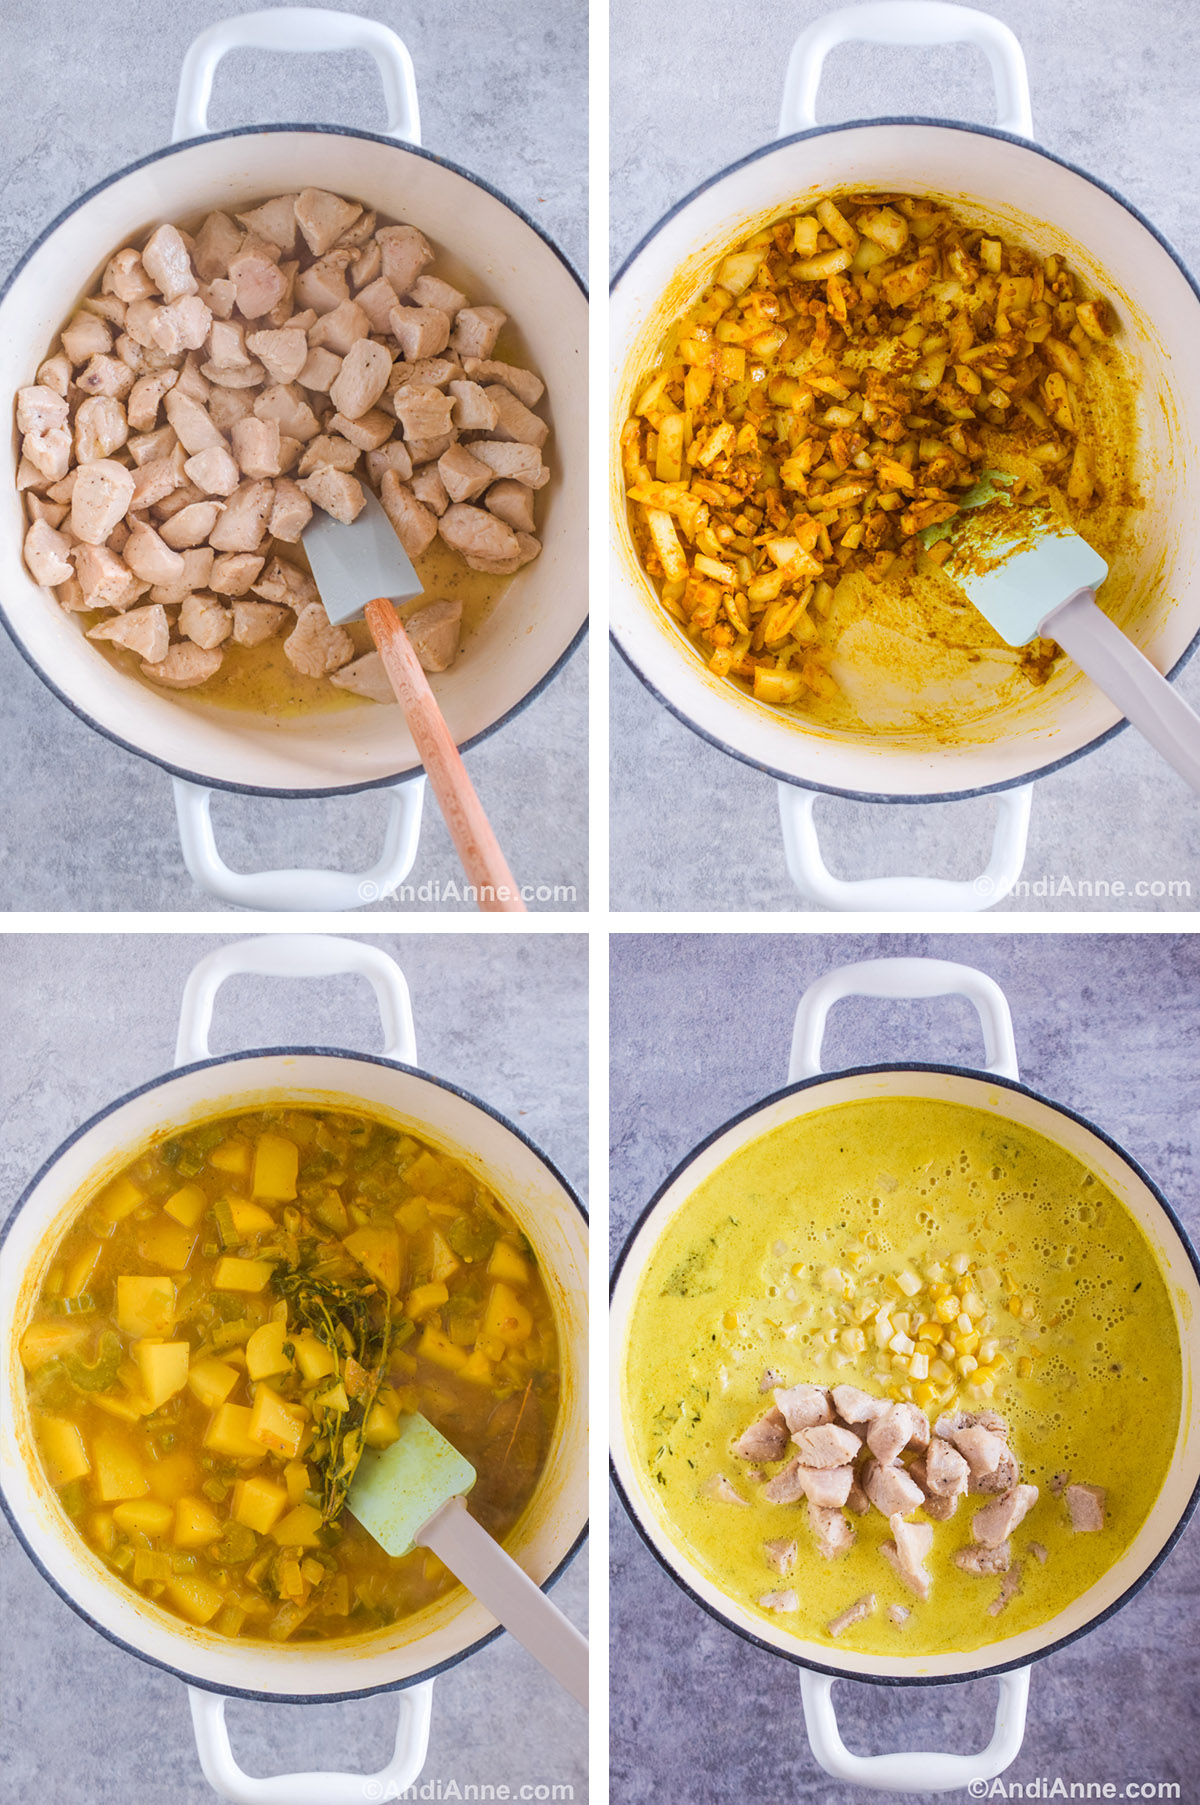 Four images showing steps to make the recipe. First is chopped cooked chicken in a large pot. Second is cooked onion and garlic mixed with curry powder. Potatoes, celery and sprigs of thyme in a yellow broth. Fourth is a pot with creamy yellow soup with corn and chicken added.